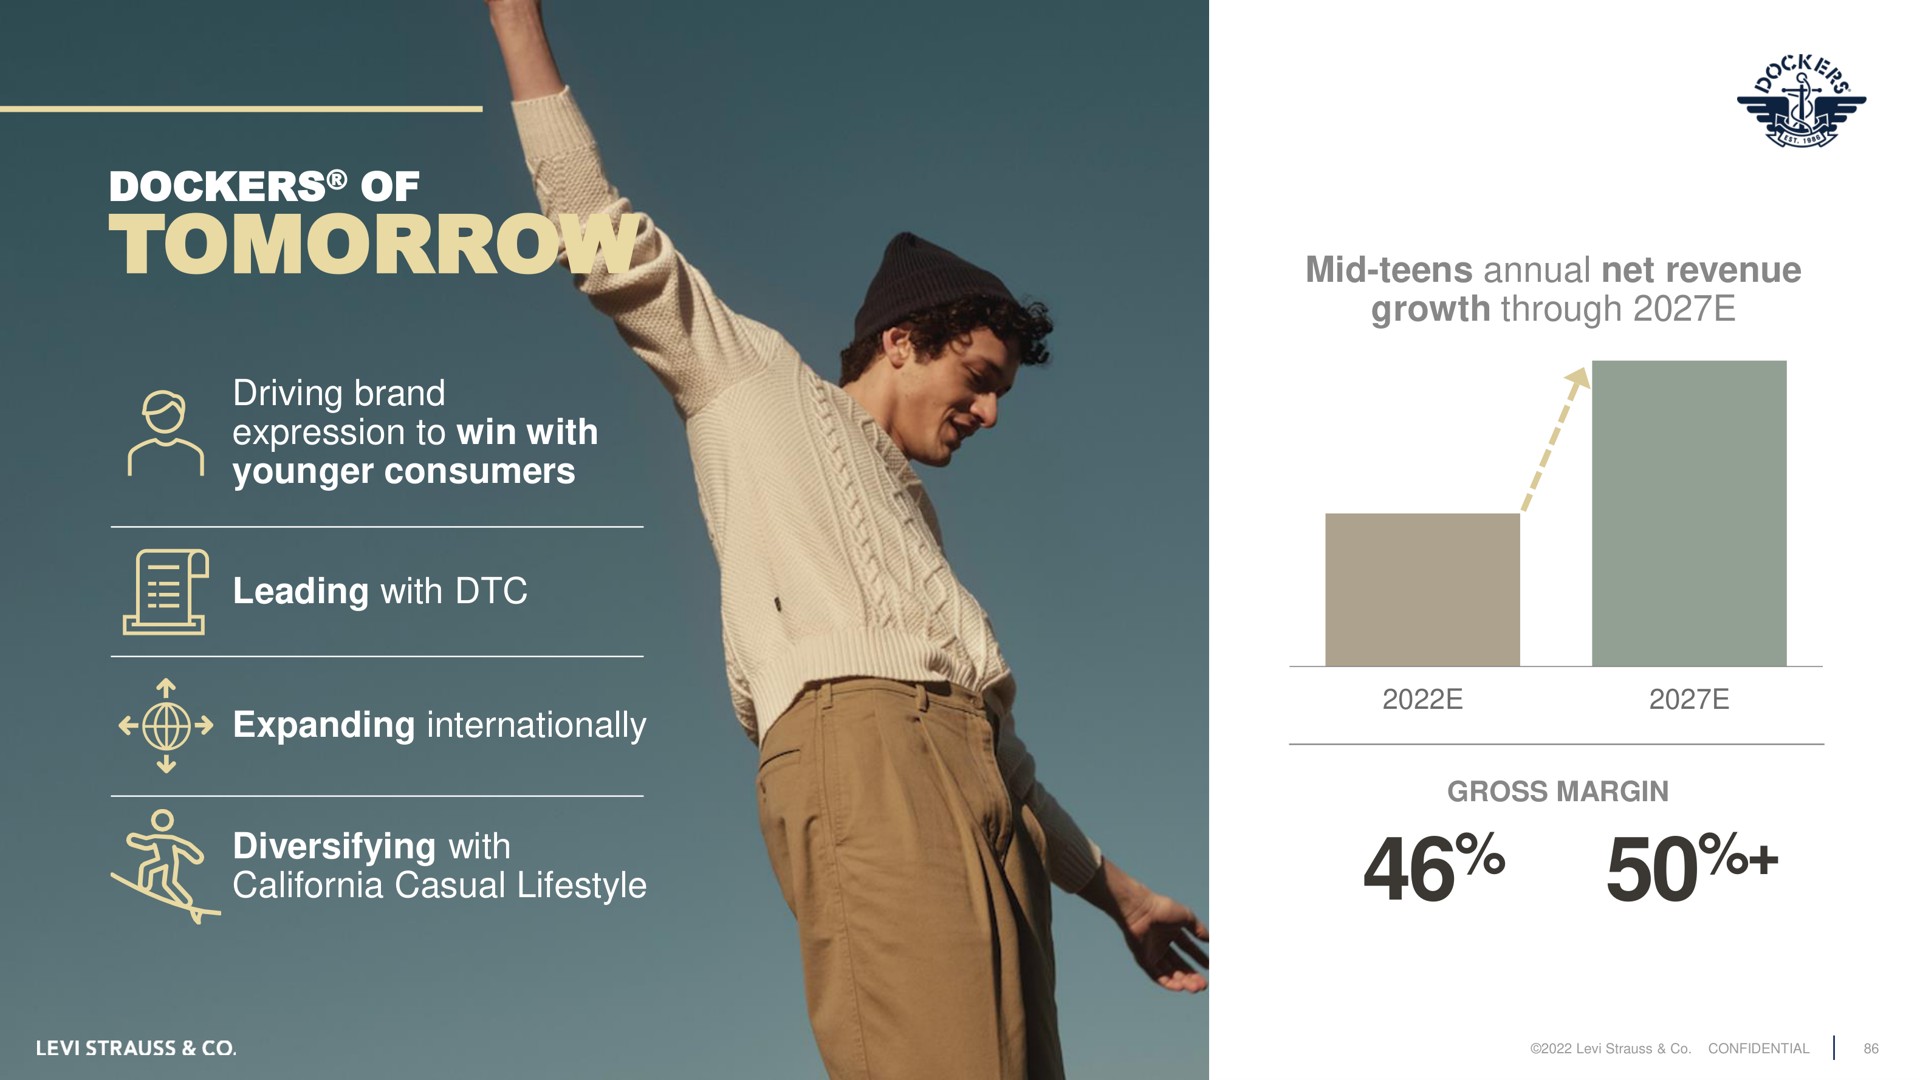 dockers of tomorrow driving brand expression to win with younger consumers leading with a expanding internationally diversifying with casual mid teens annual net revenue growth through | Levi Strauss